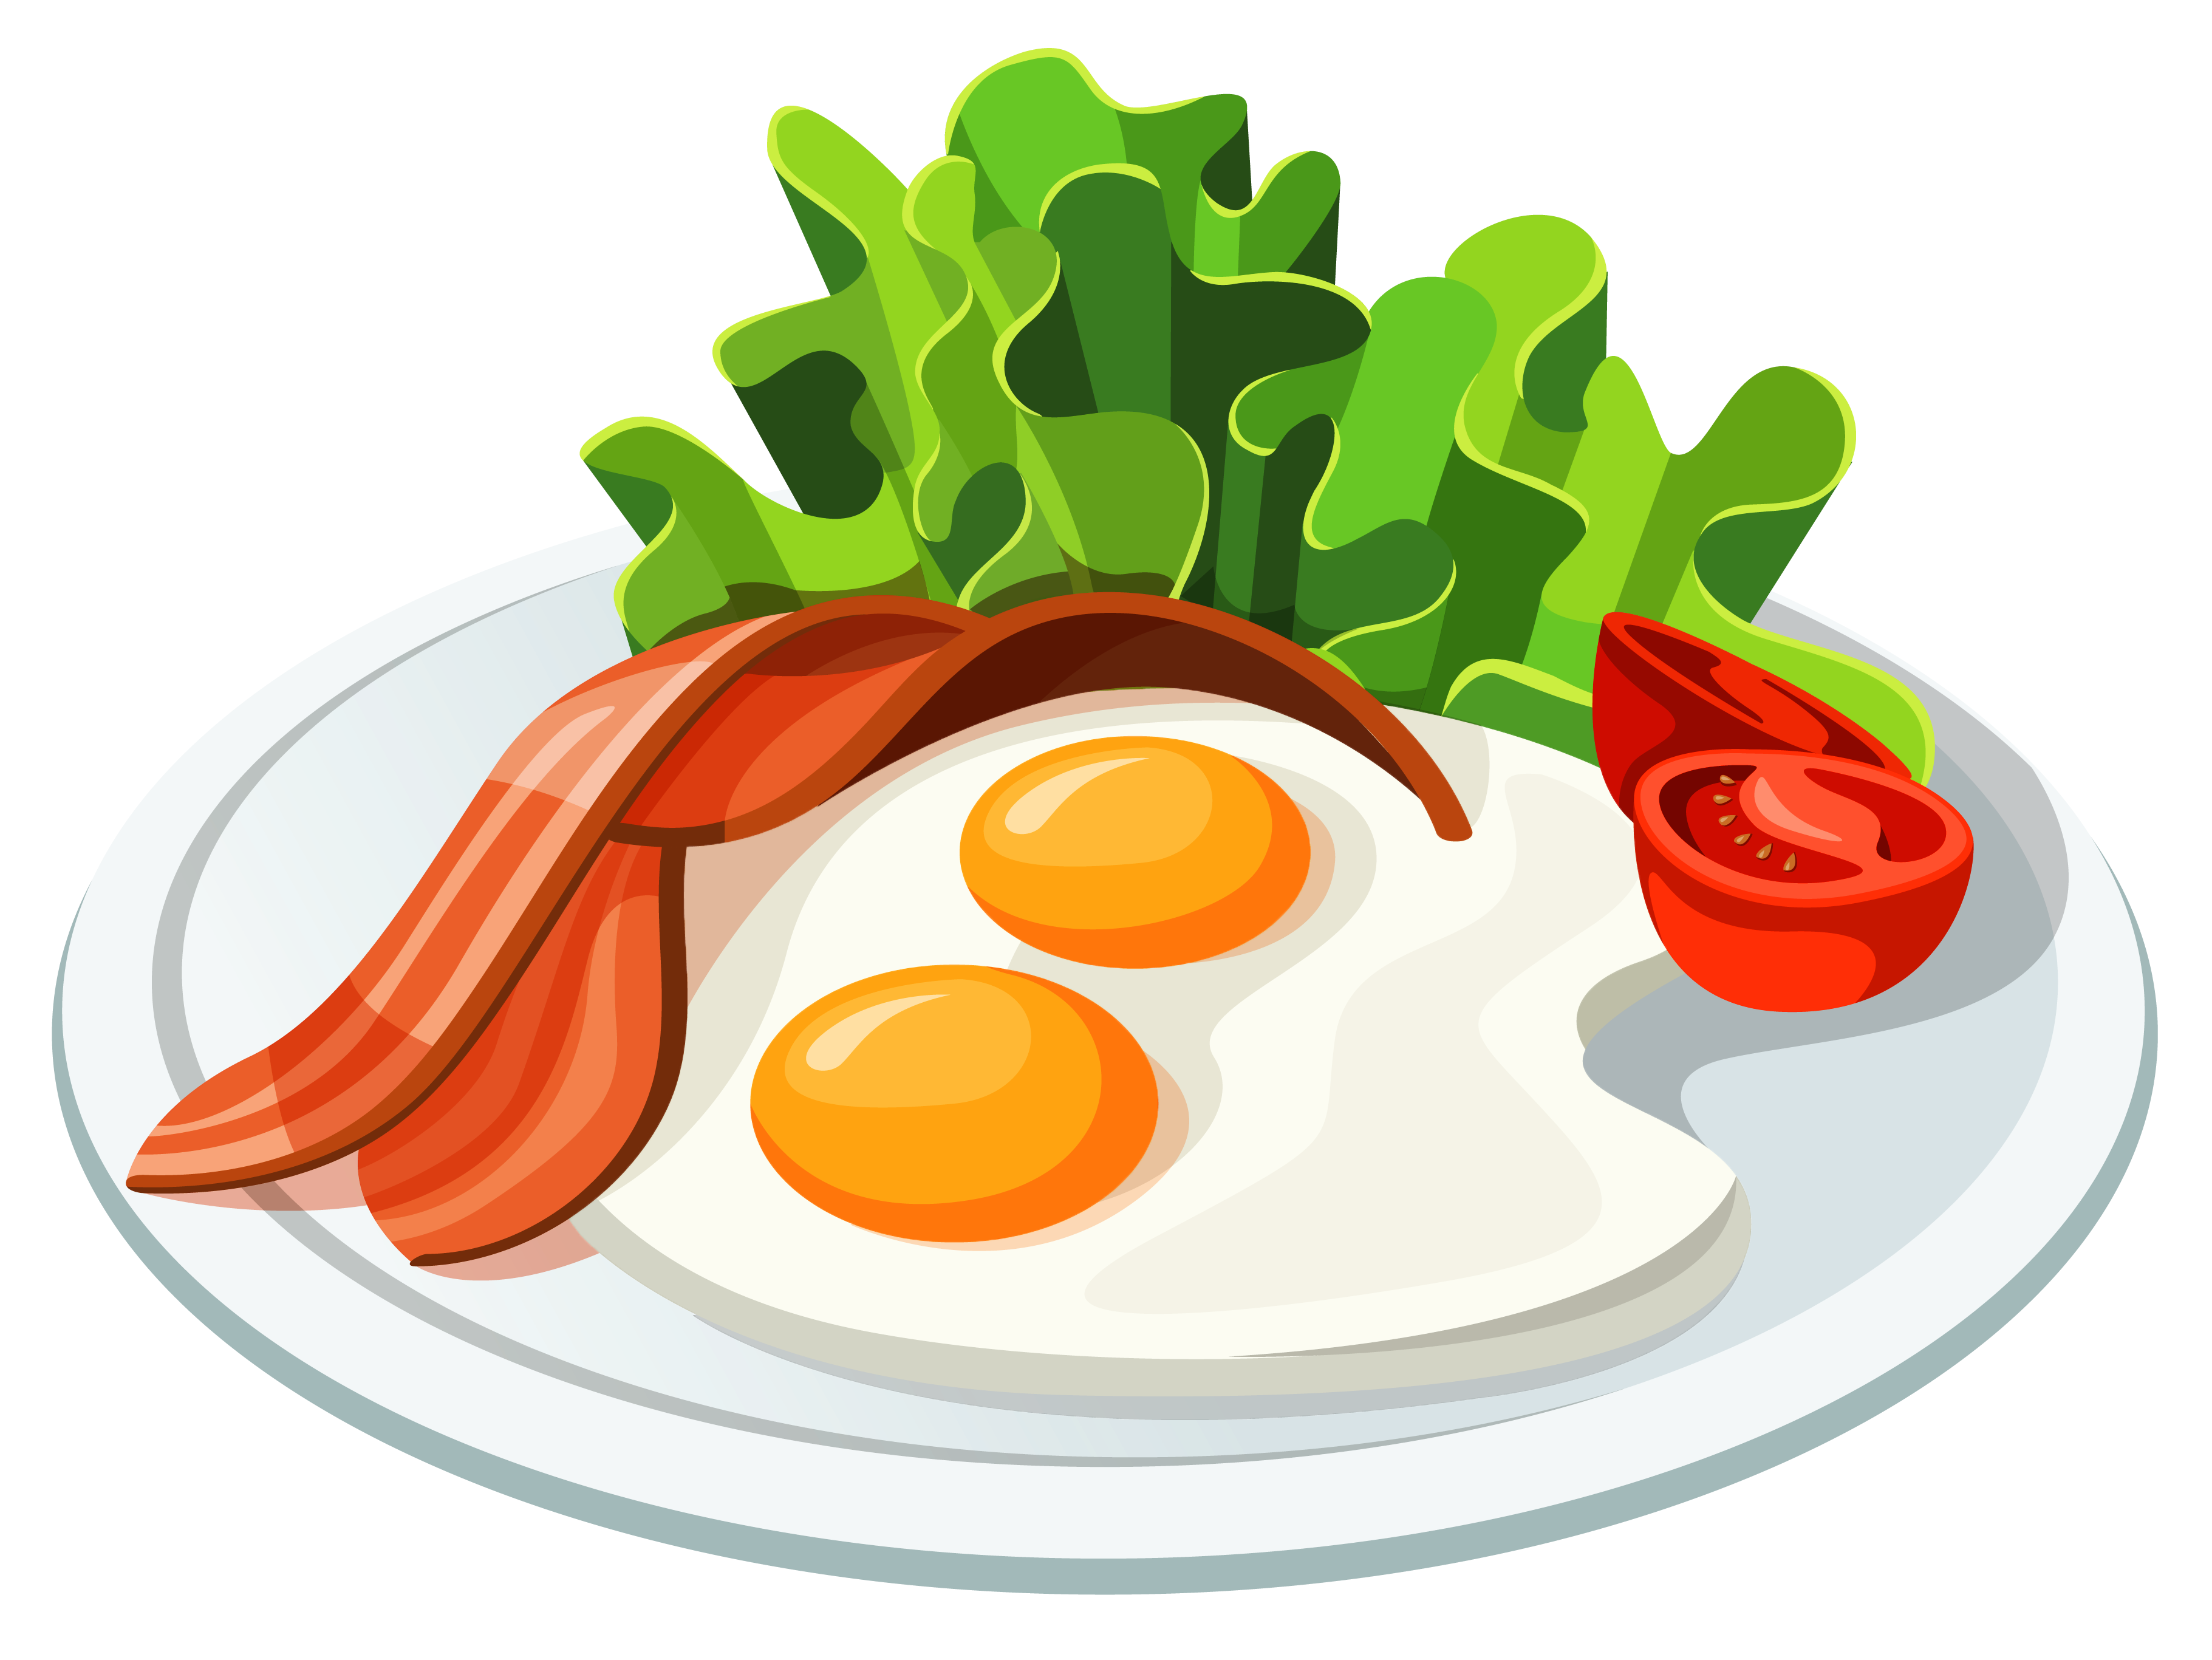 Eggs and bacon png. Holidays clipart holiday meal